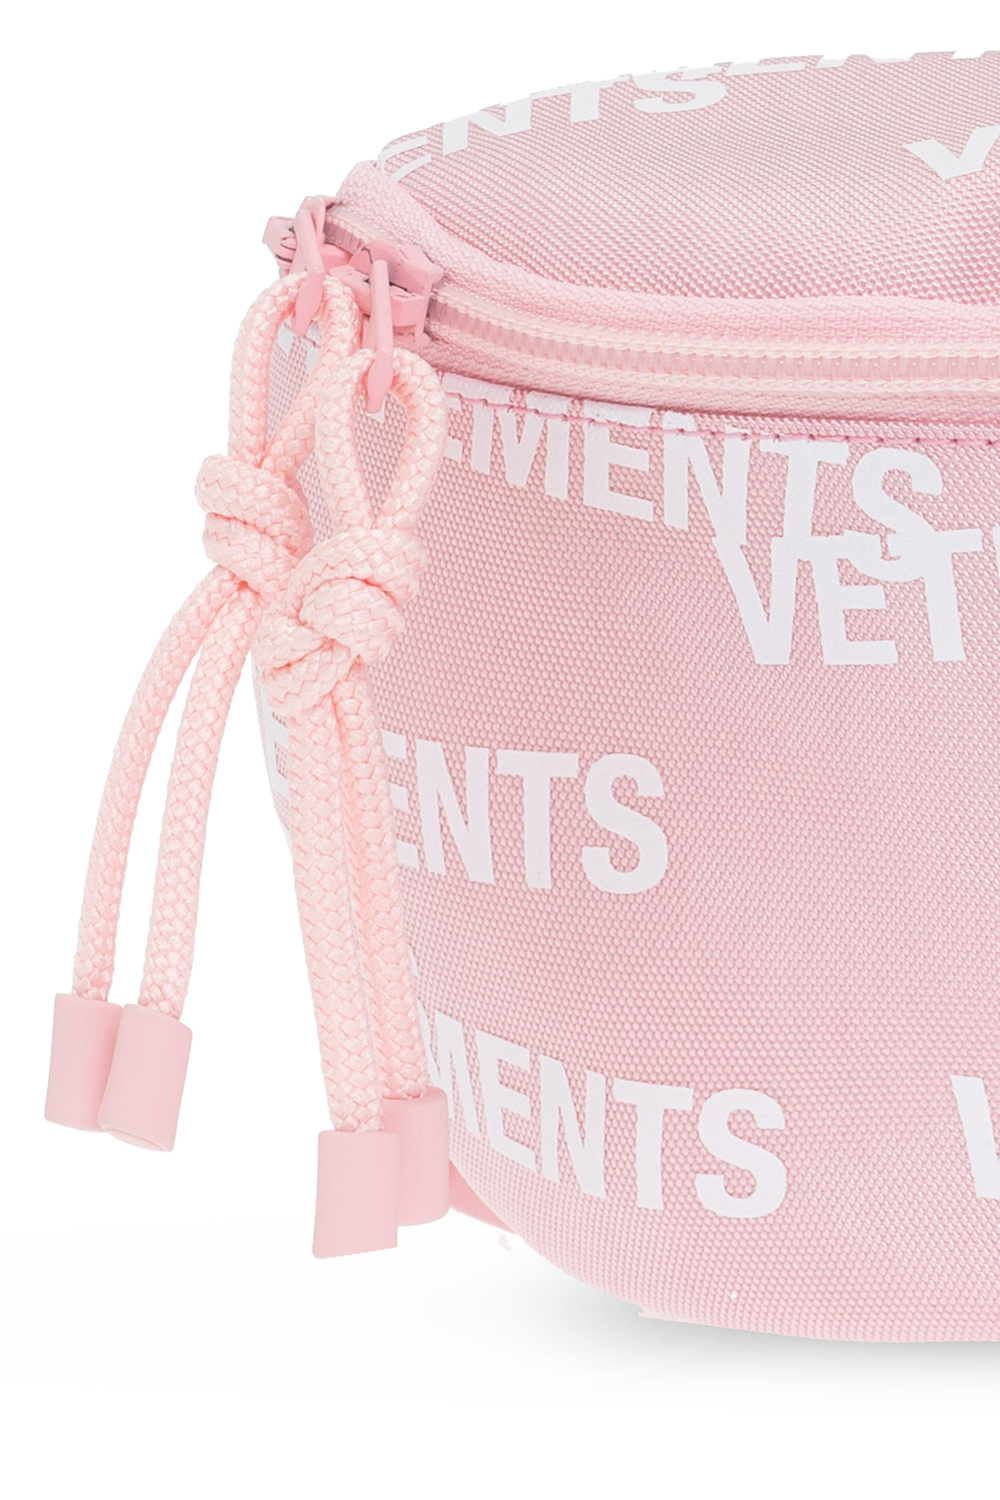 VETEMENTS Cosmetic Oval Bag